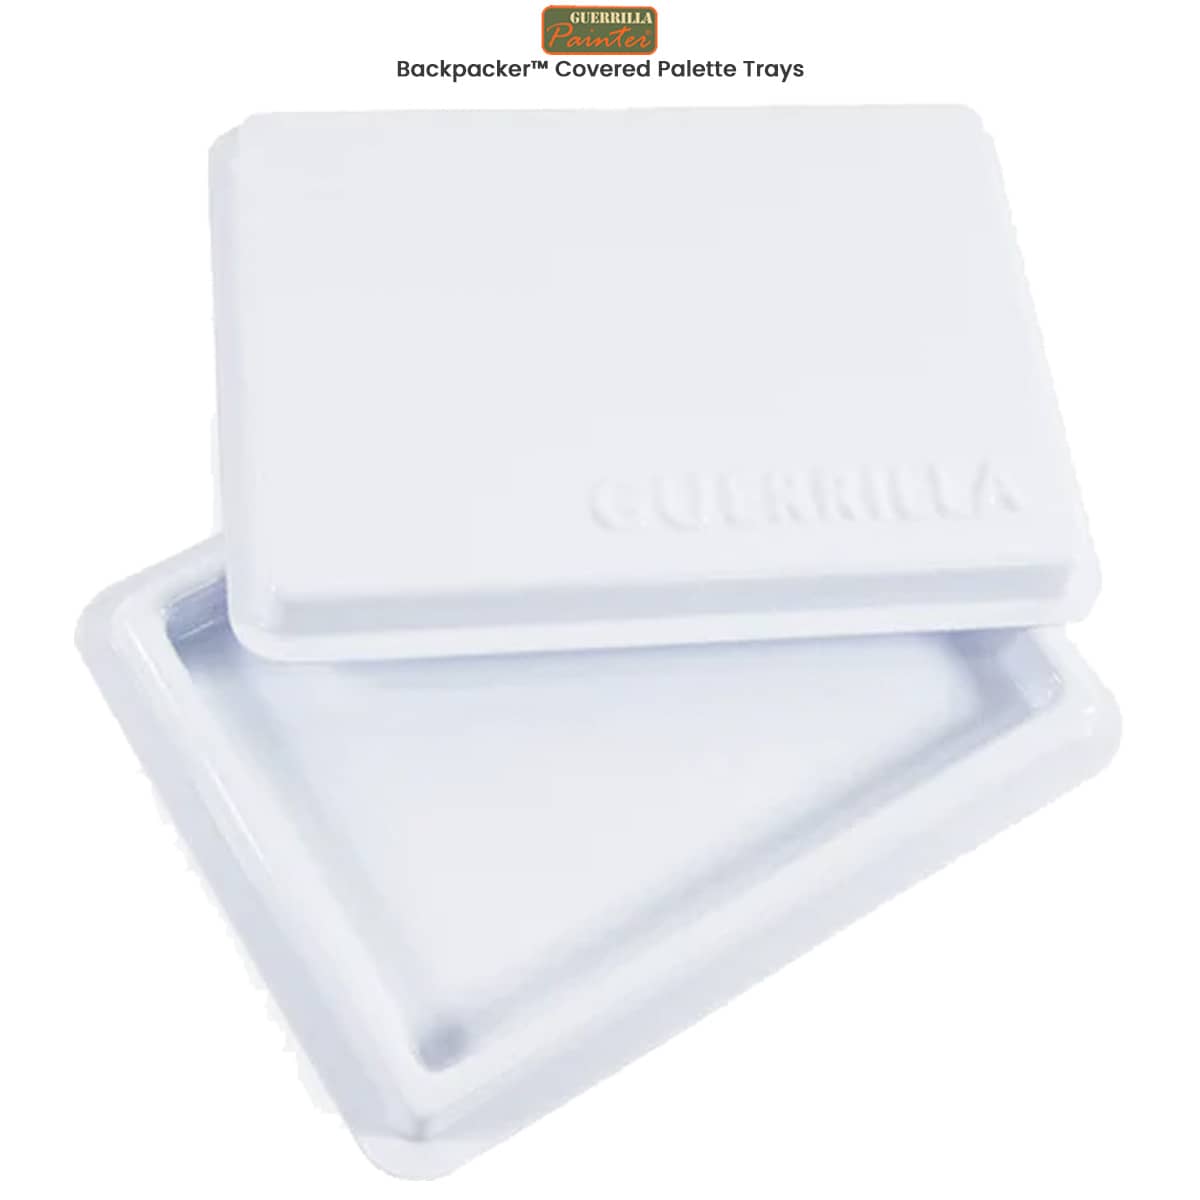 Jack Richeson 5-Piece Heavy Duty Plastic Brush Basin and Palette with Lid, 6 x 6 in